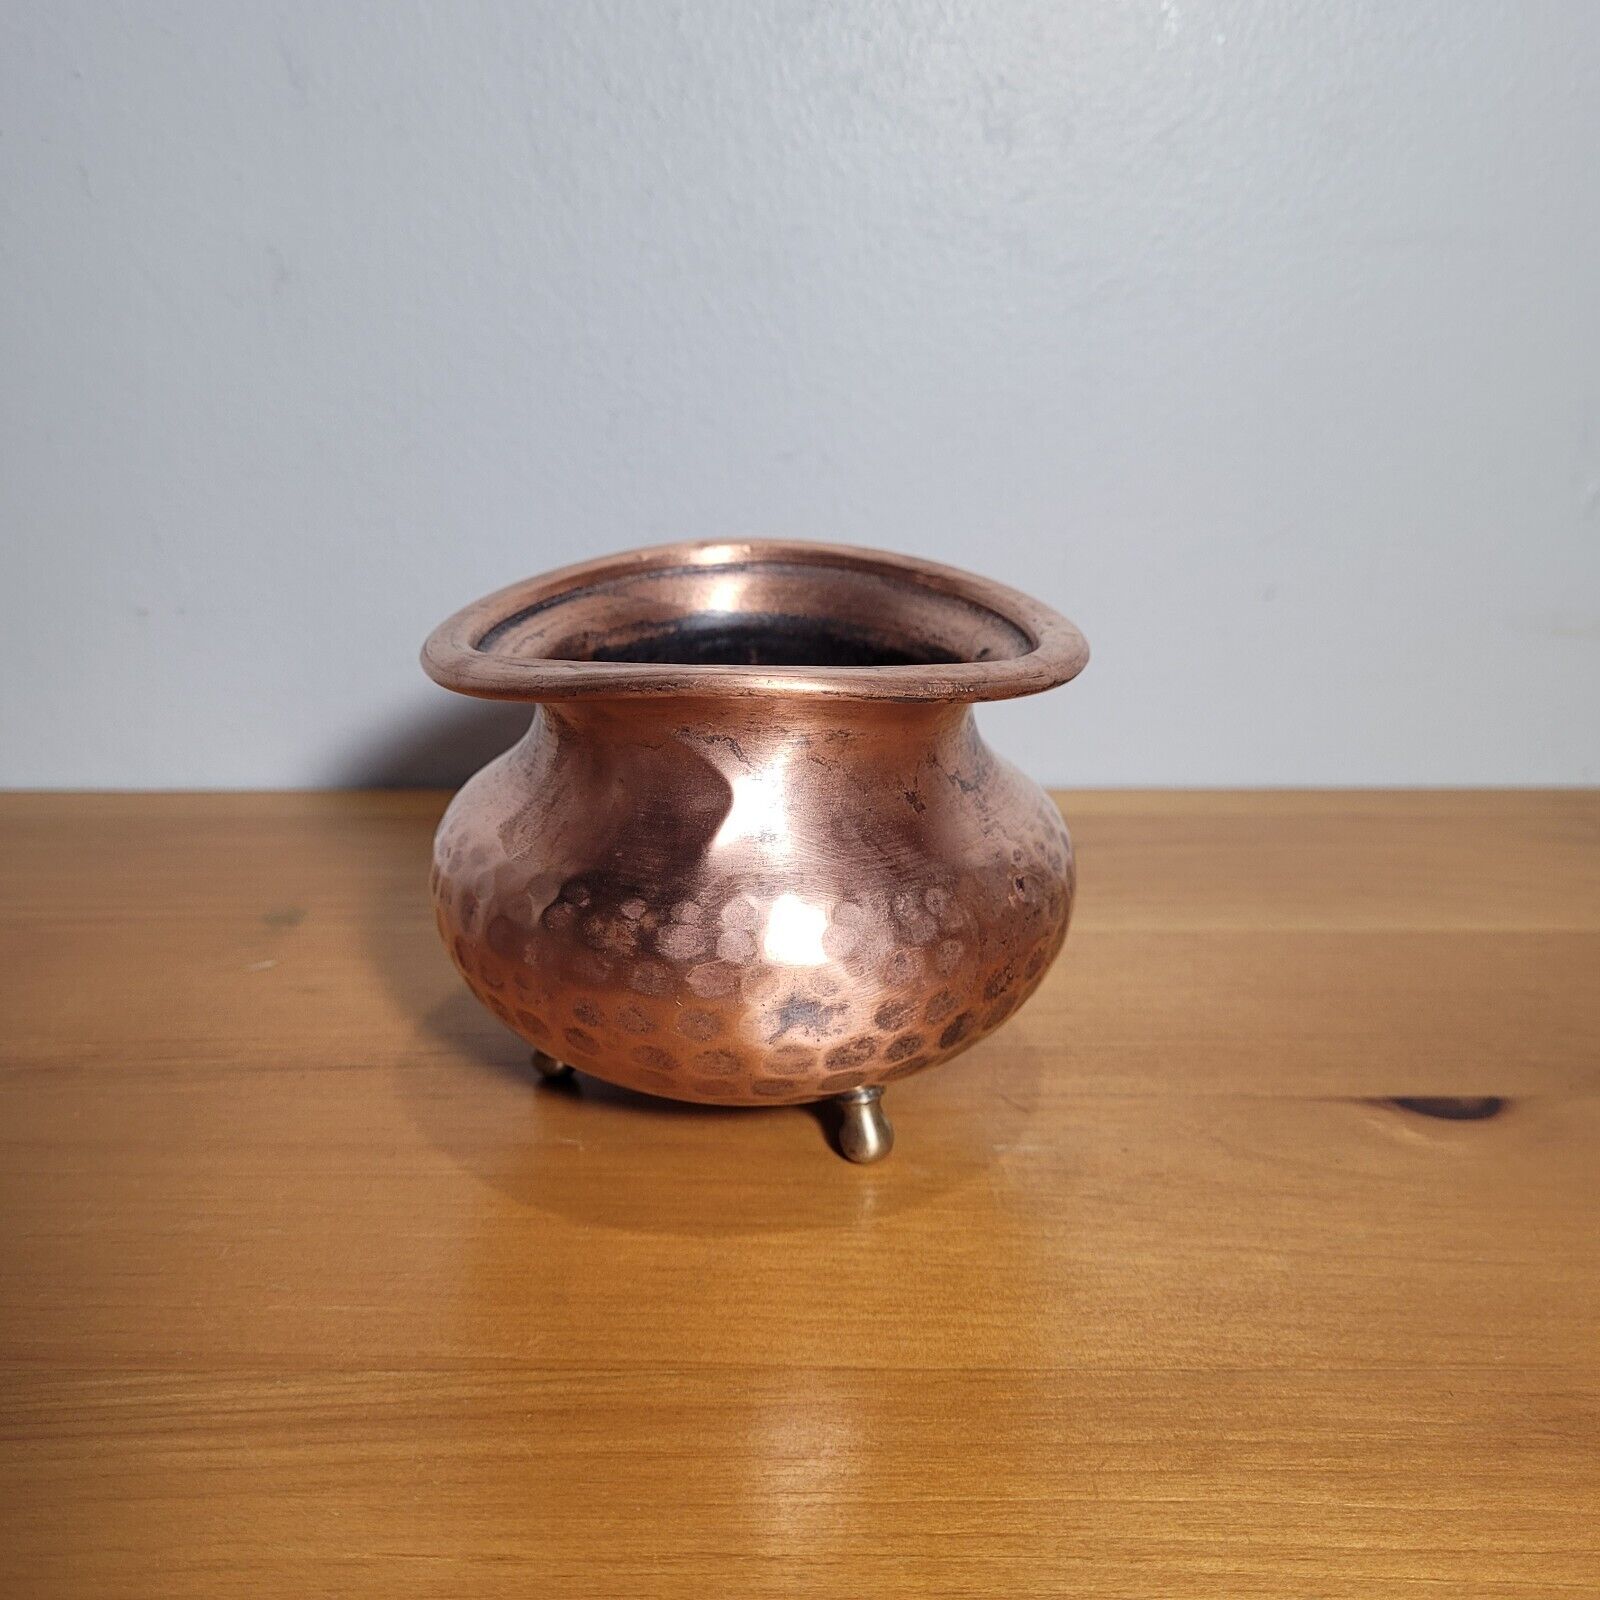 19th Century Antique Copper Bowl Hammered Copper Bowl Footed with Brass Feet